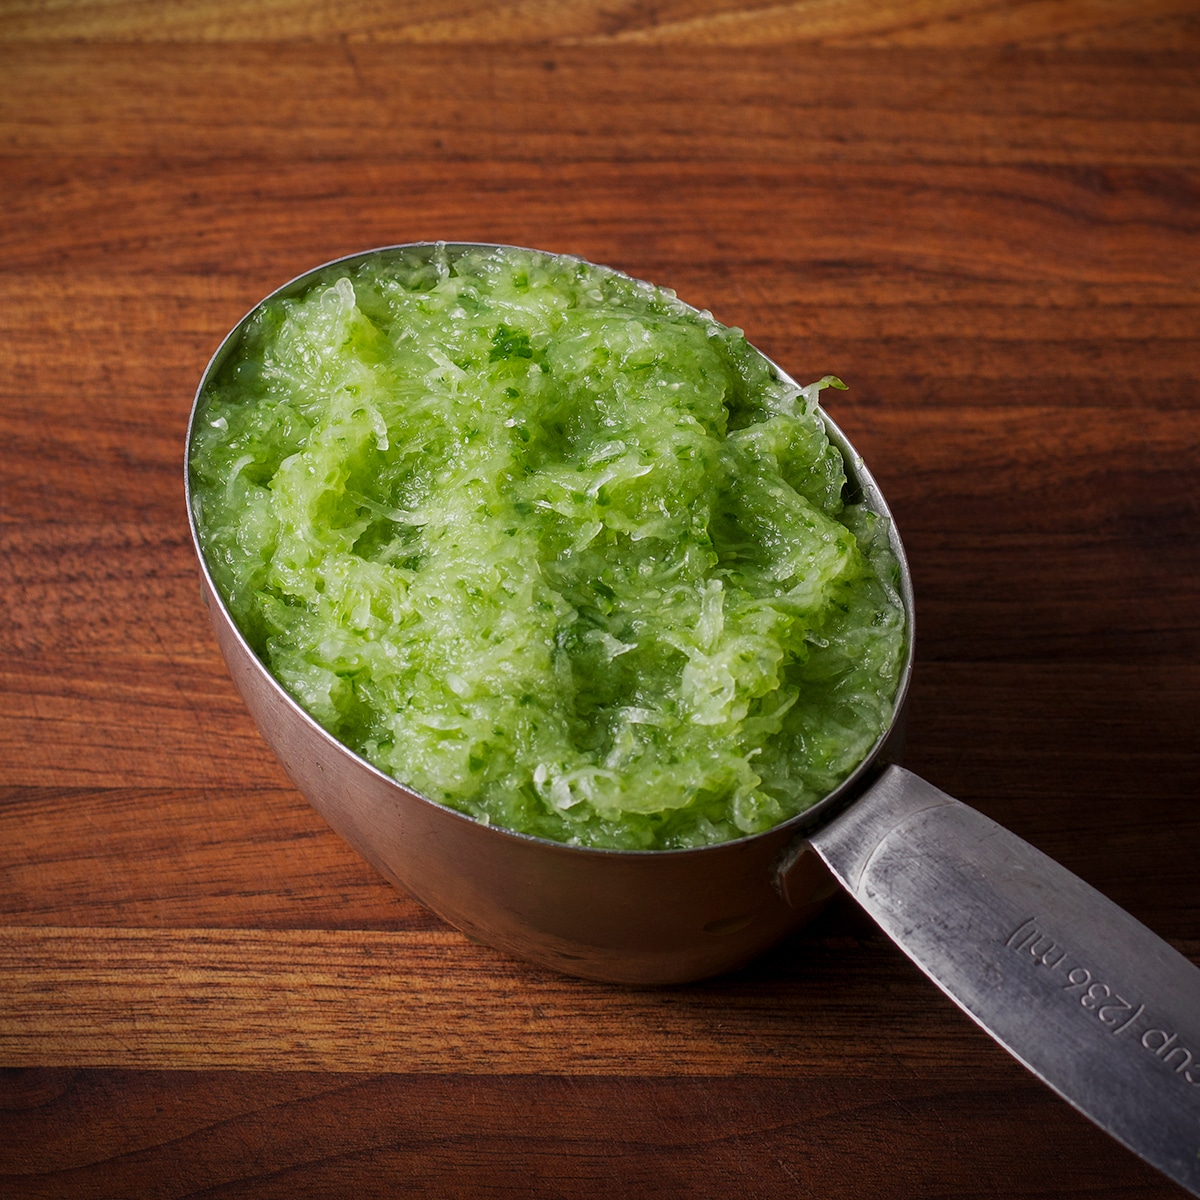 A one-cup measure containing grated cucumber.